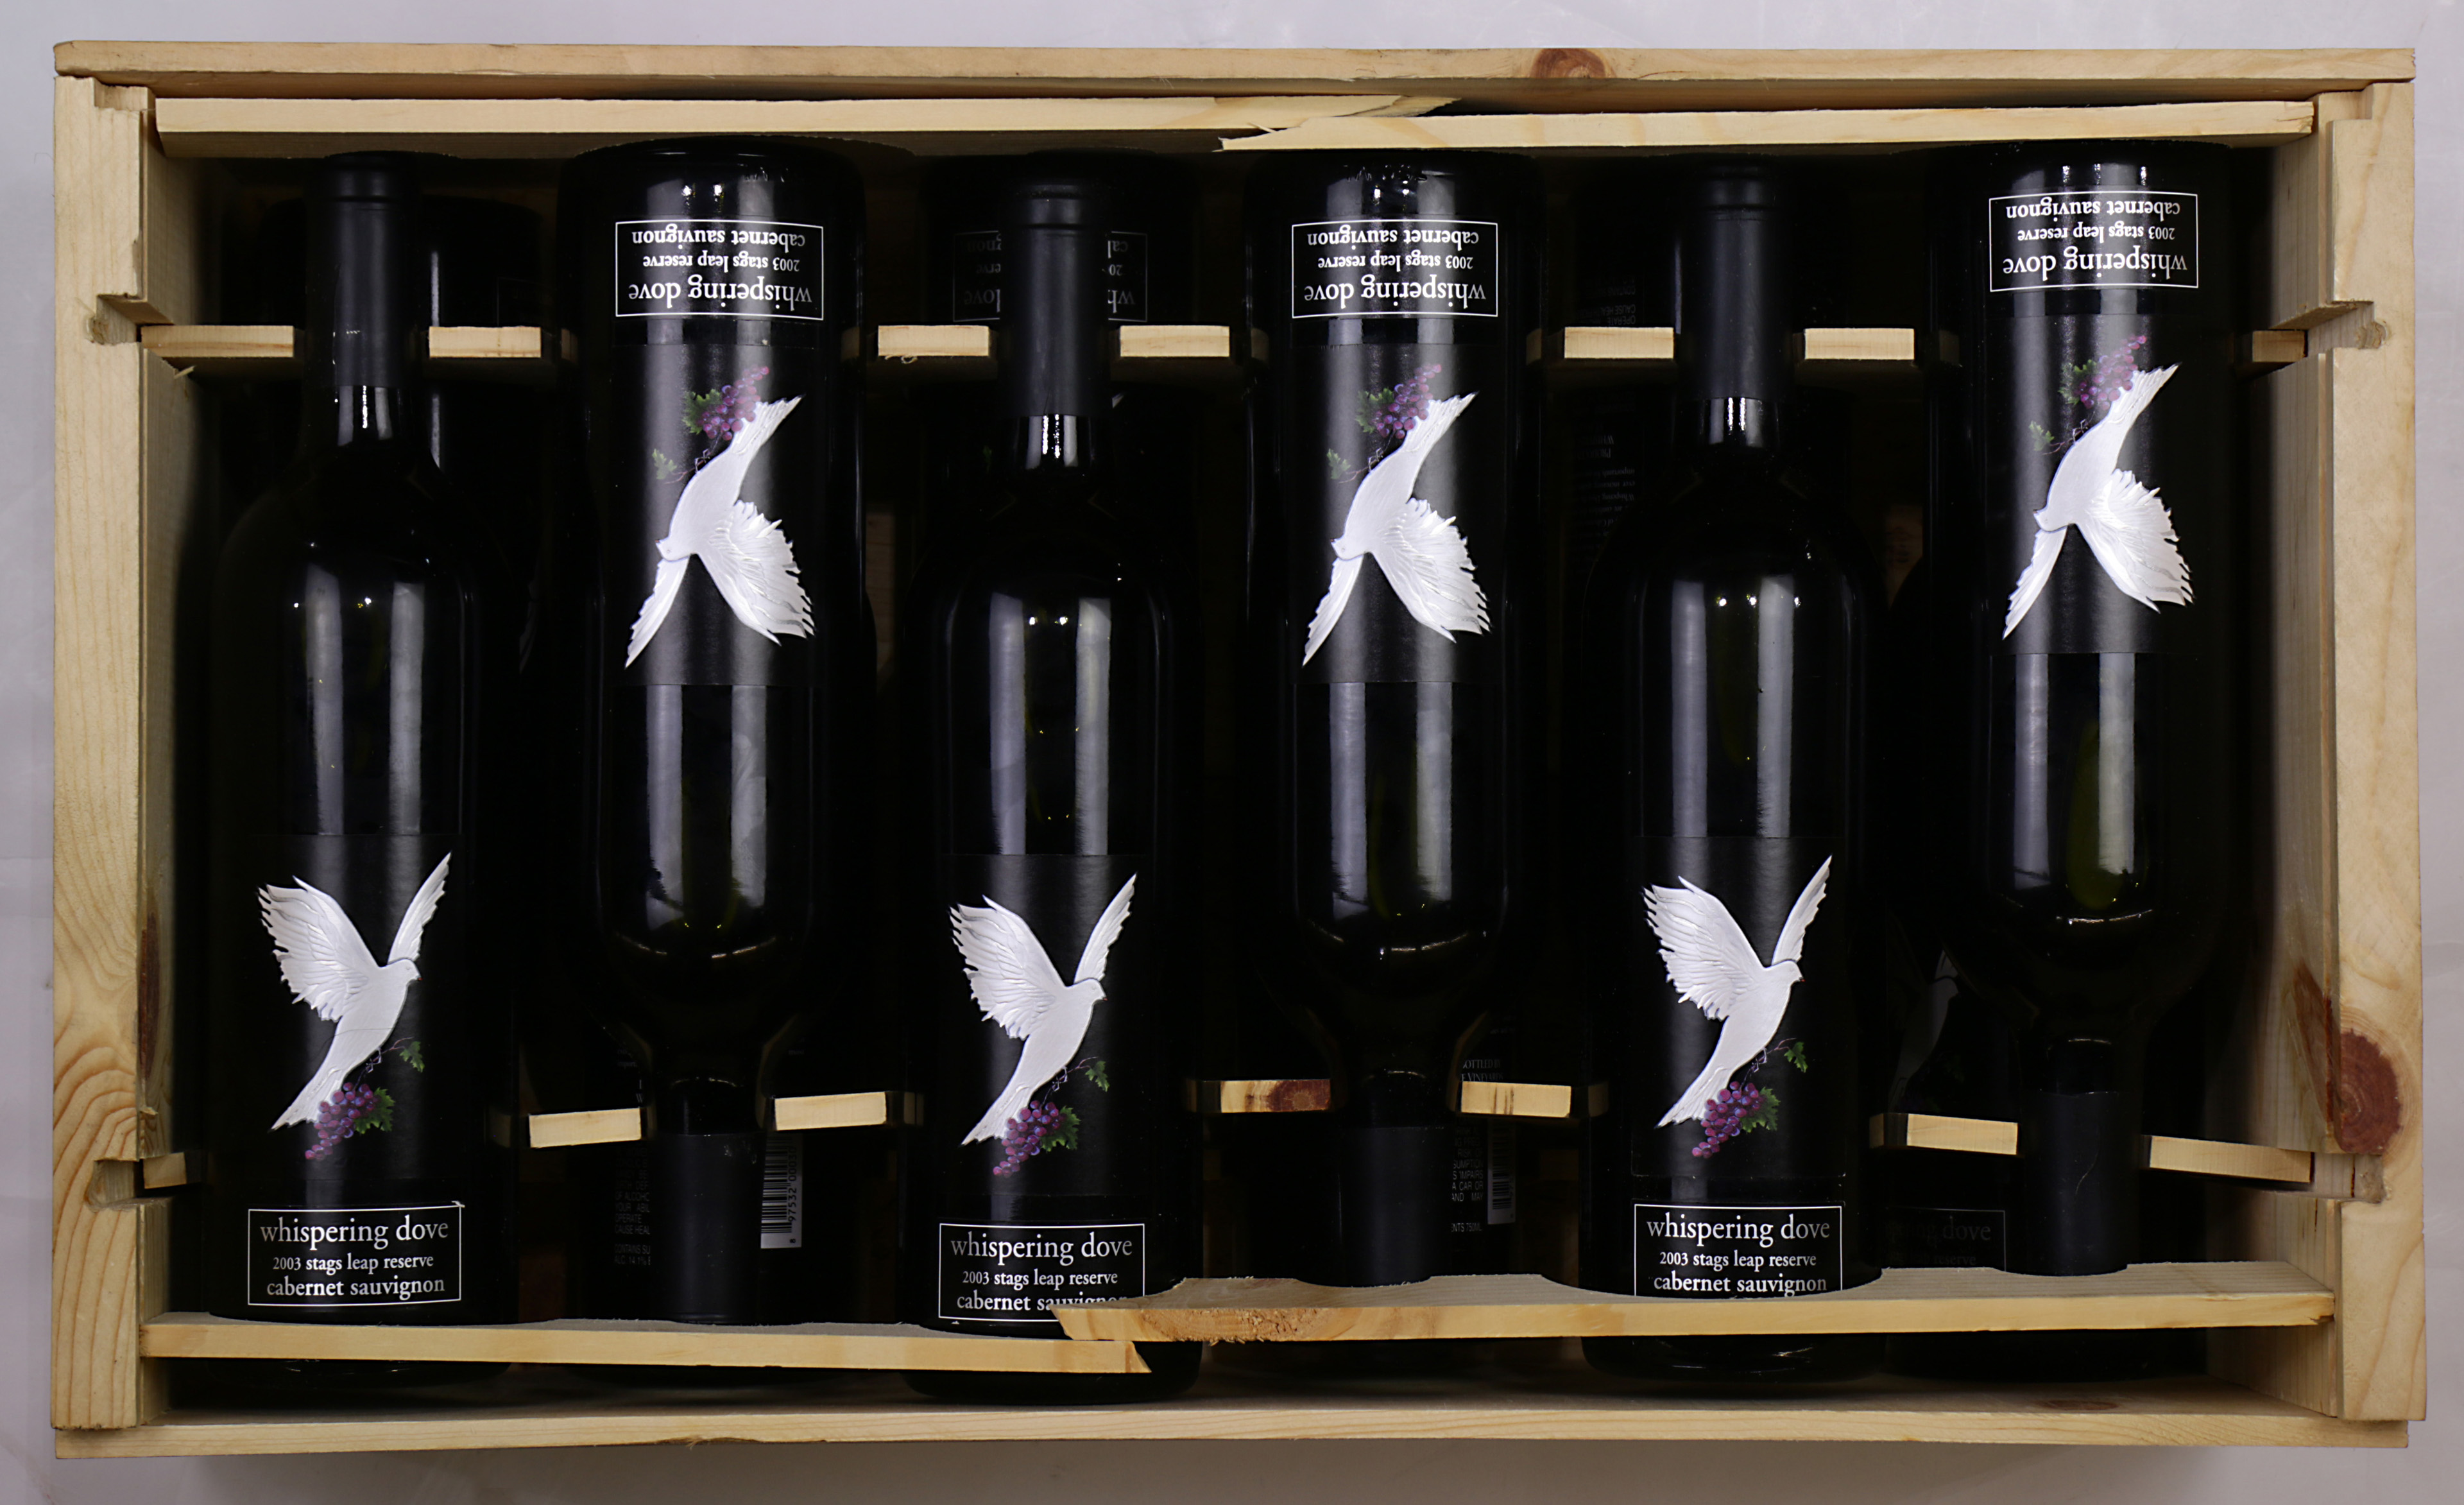 A case of 2003 Stags Leap Reserve Whispering Dove Cabernet Sauvignon - Image 4 of 6